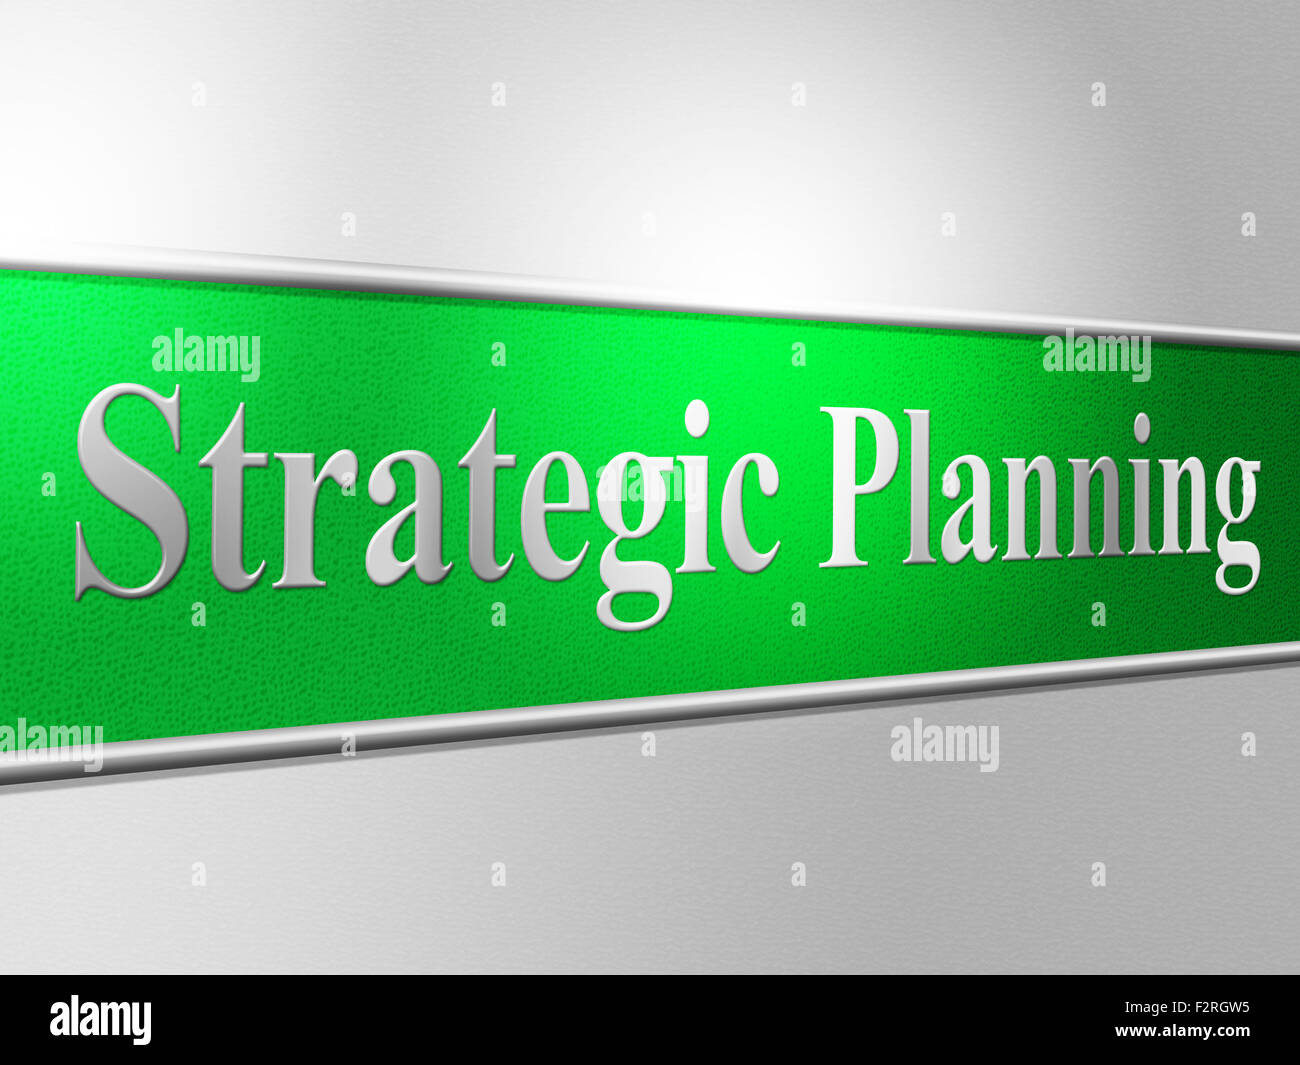 Strategic Planning Indicating Business Strategy And Agenda Stock Photo